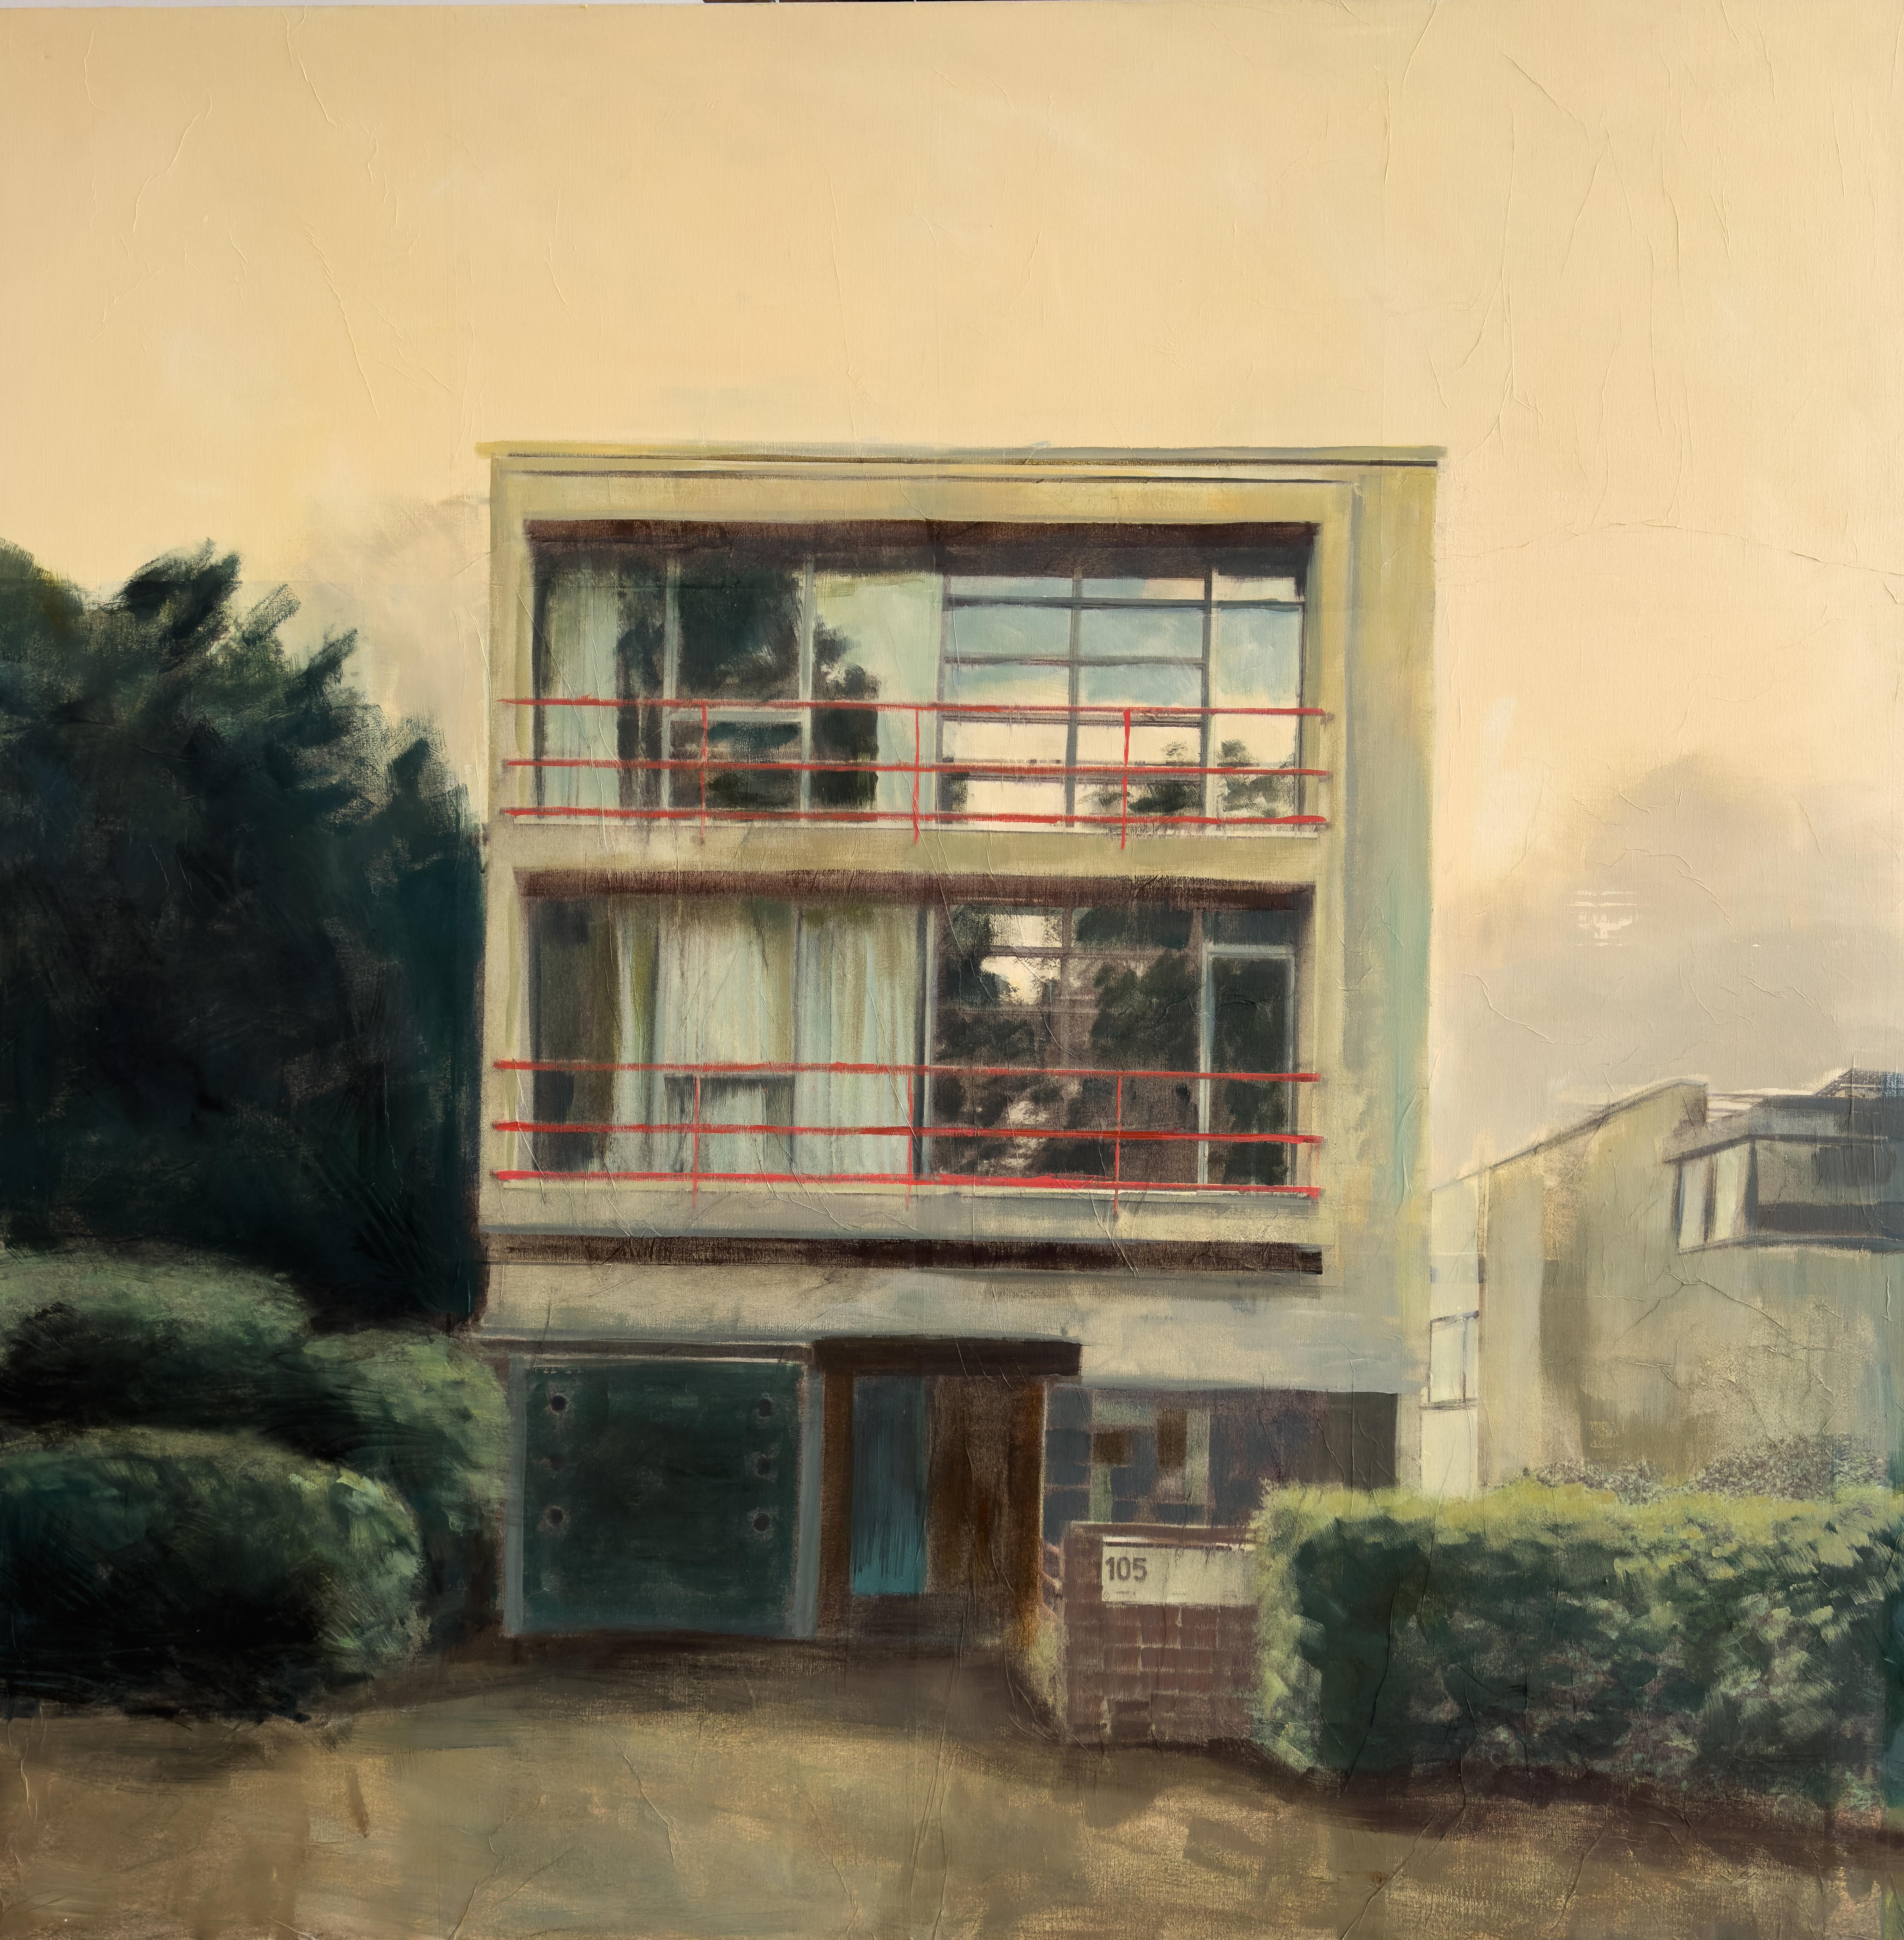 “DE KONINCK HOUSE”
120X120 CM
ACRYLIC ON LINEN
2023

The artist, Bea Sarrias, has developed much of her work in Barcelona, where she studied Fine Arts and soon became interested in architecture and the portrayal of iconic spaces. Her work, based on